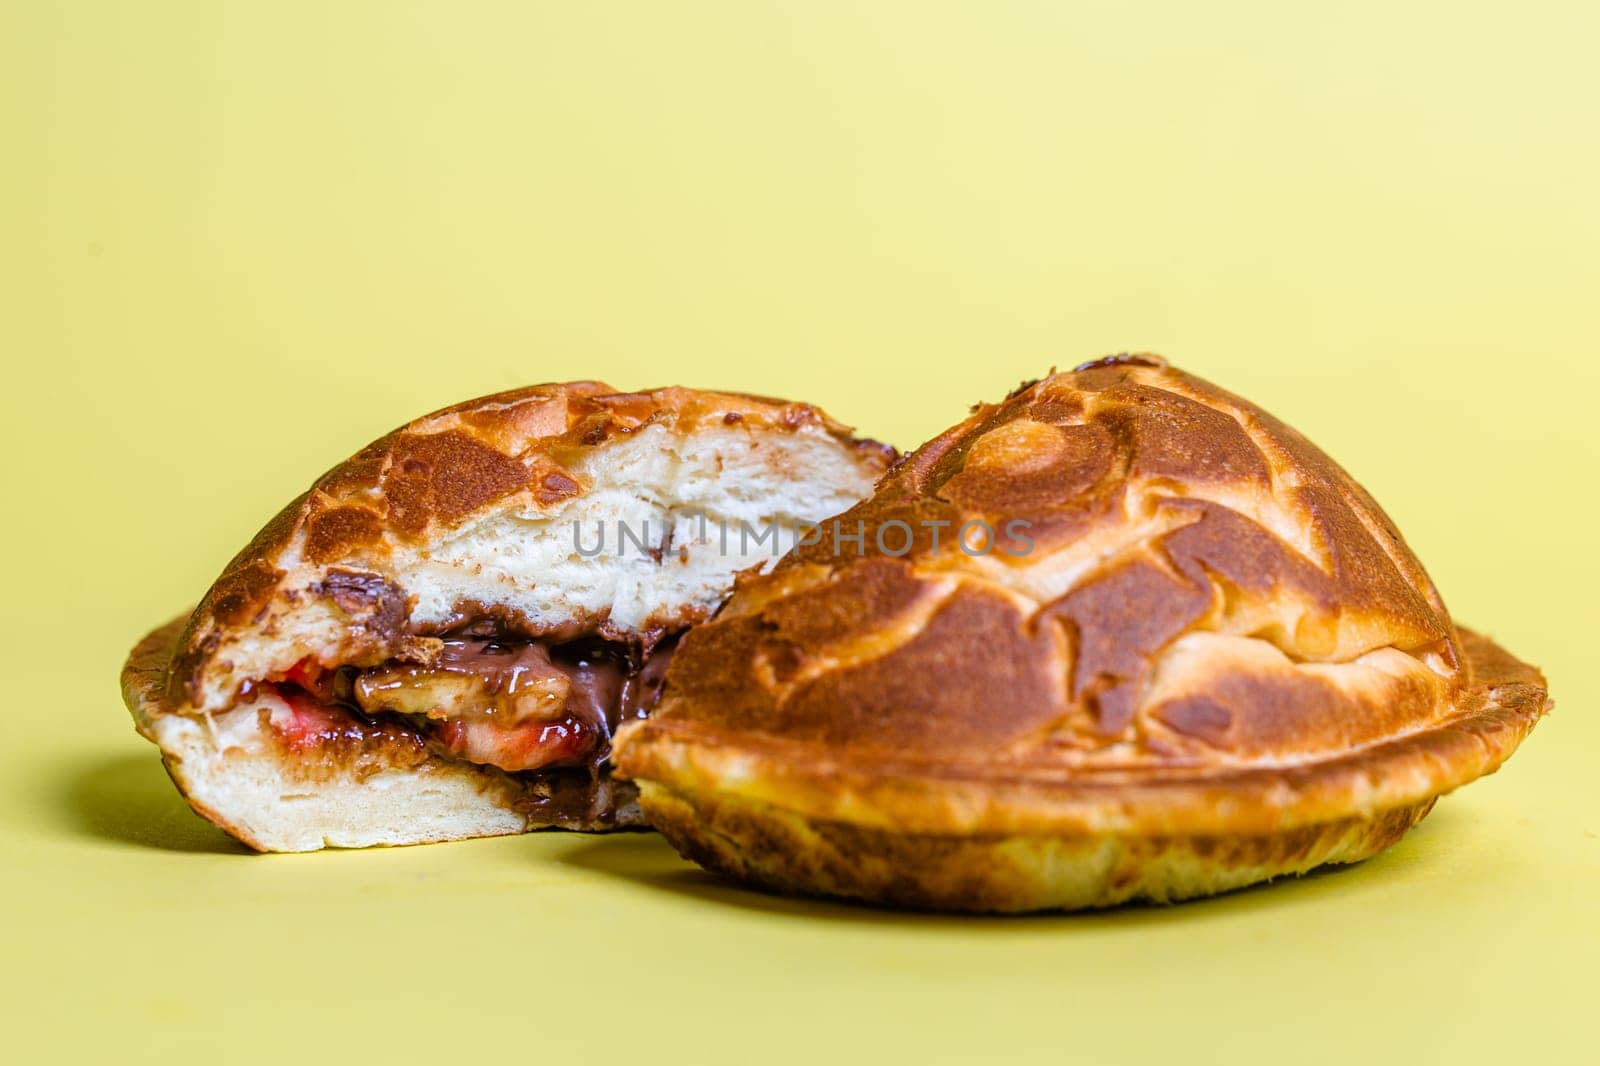 a closed cut burger with juicy filling on a yellow background by Pukhovskiy